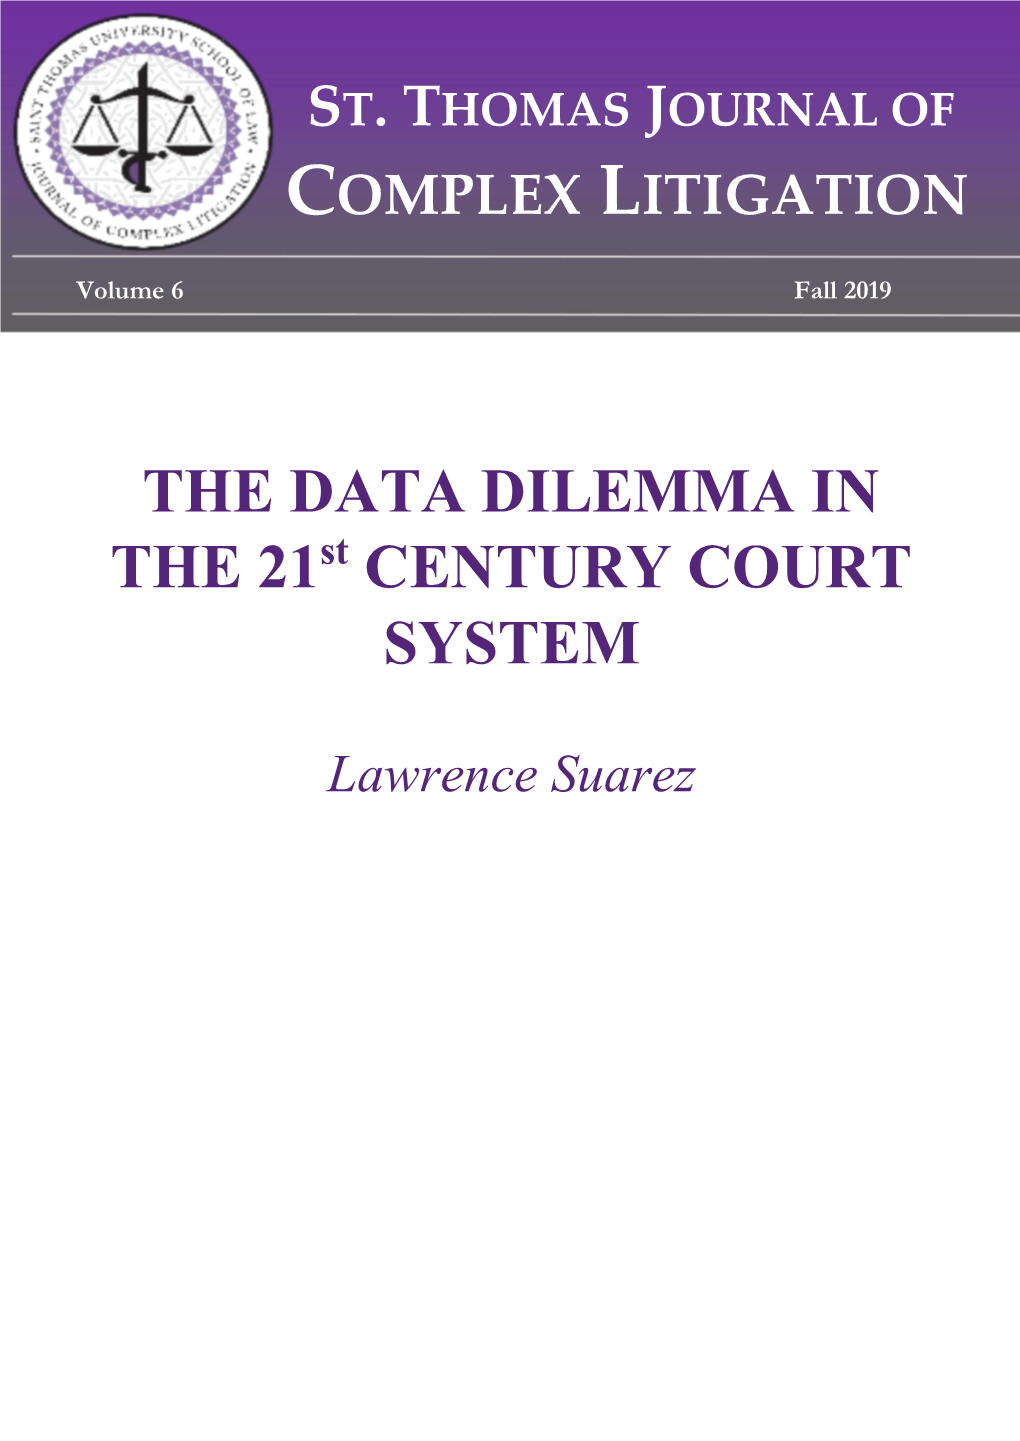 THE DATA DILEMMA in the 21St CENTURY COURT SYSTEM